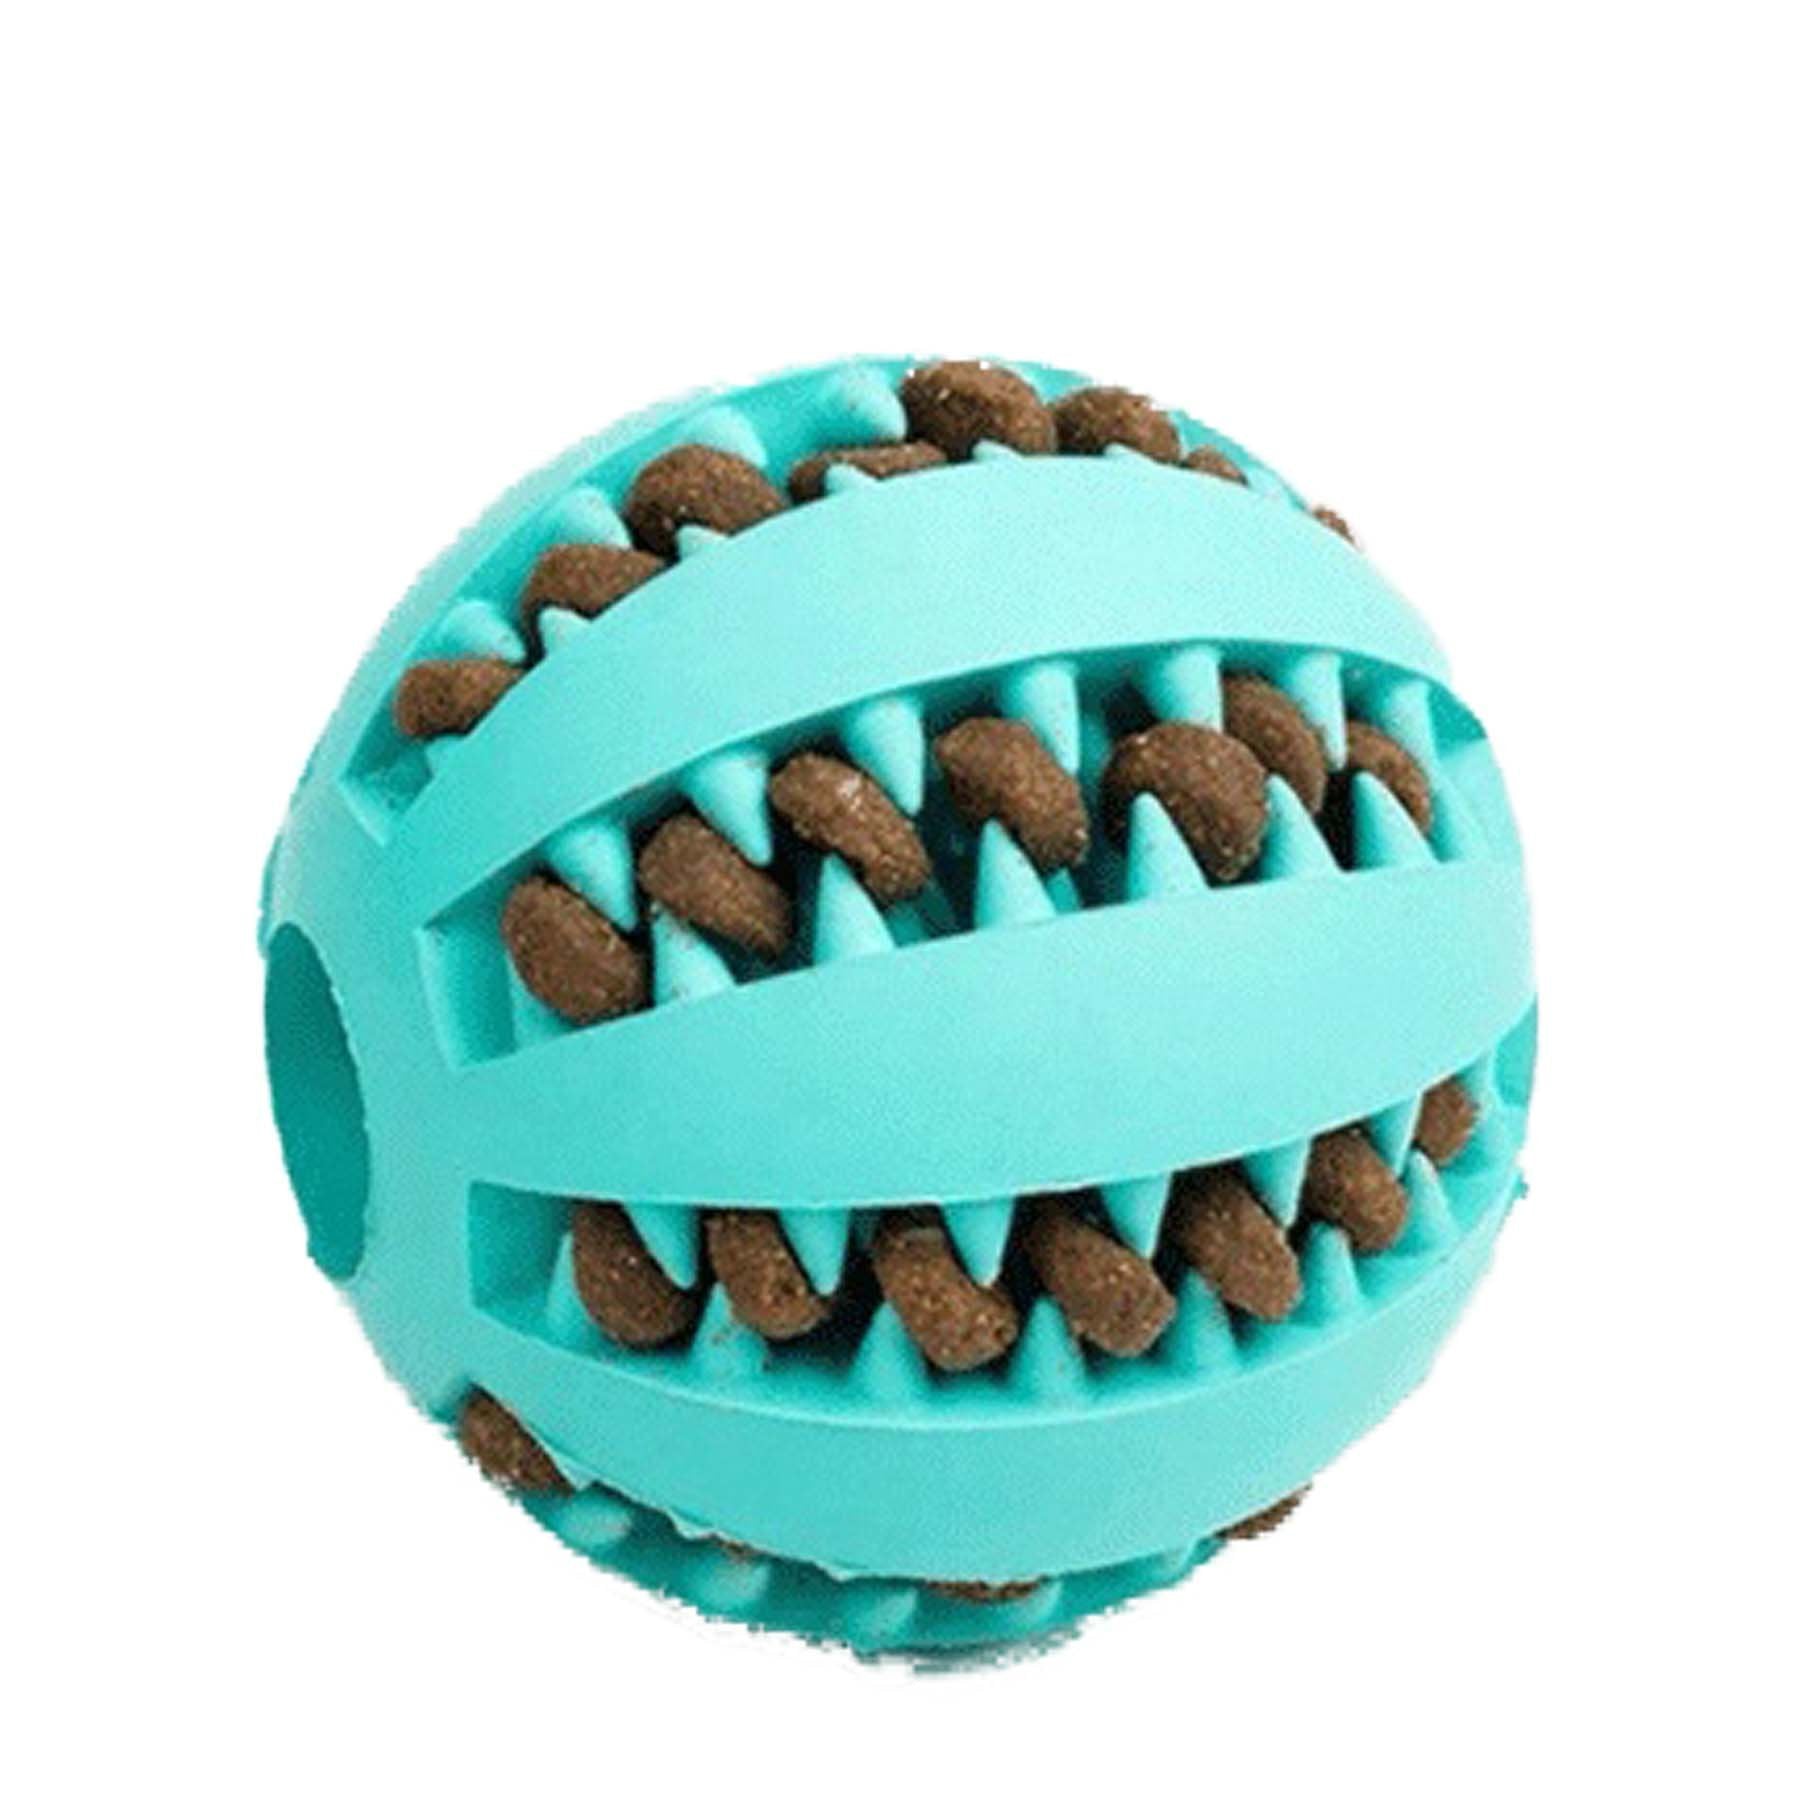 Dog Treat Toy Ball, Dog Tooth Cleaning Toy, Interactive Dog Toys(1 Green+1  Bl